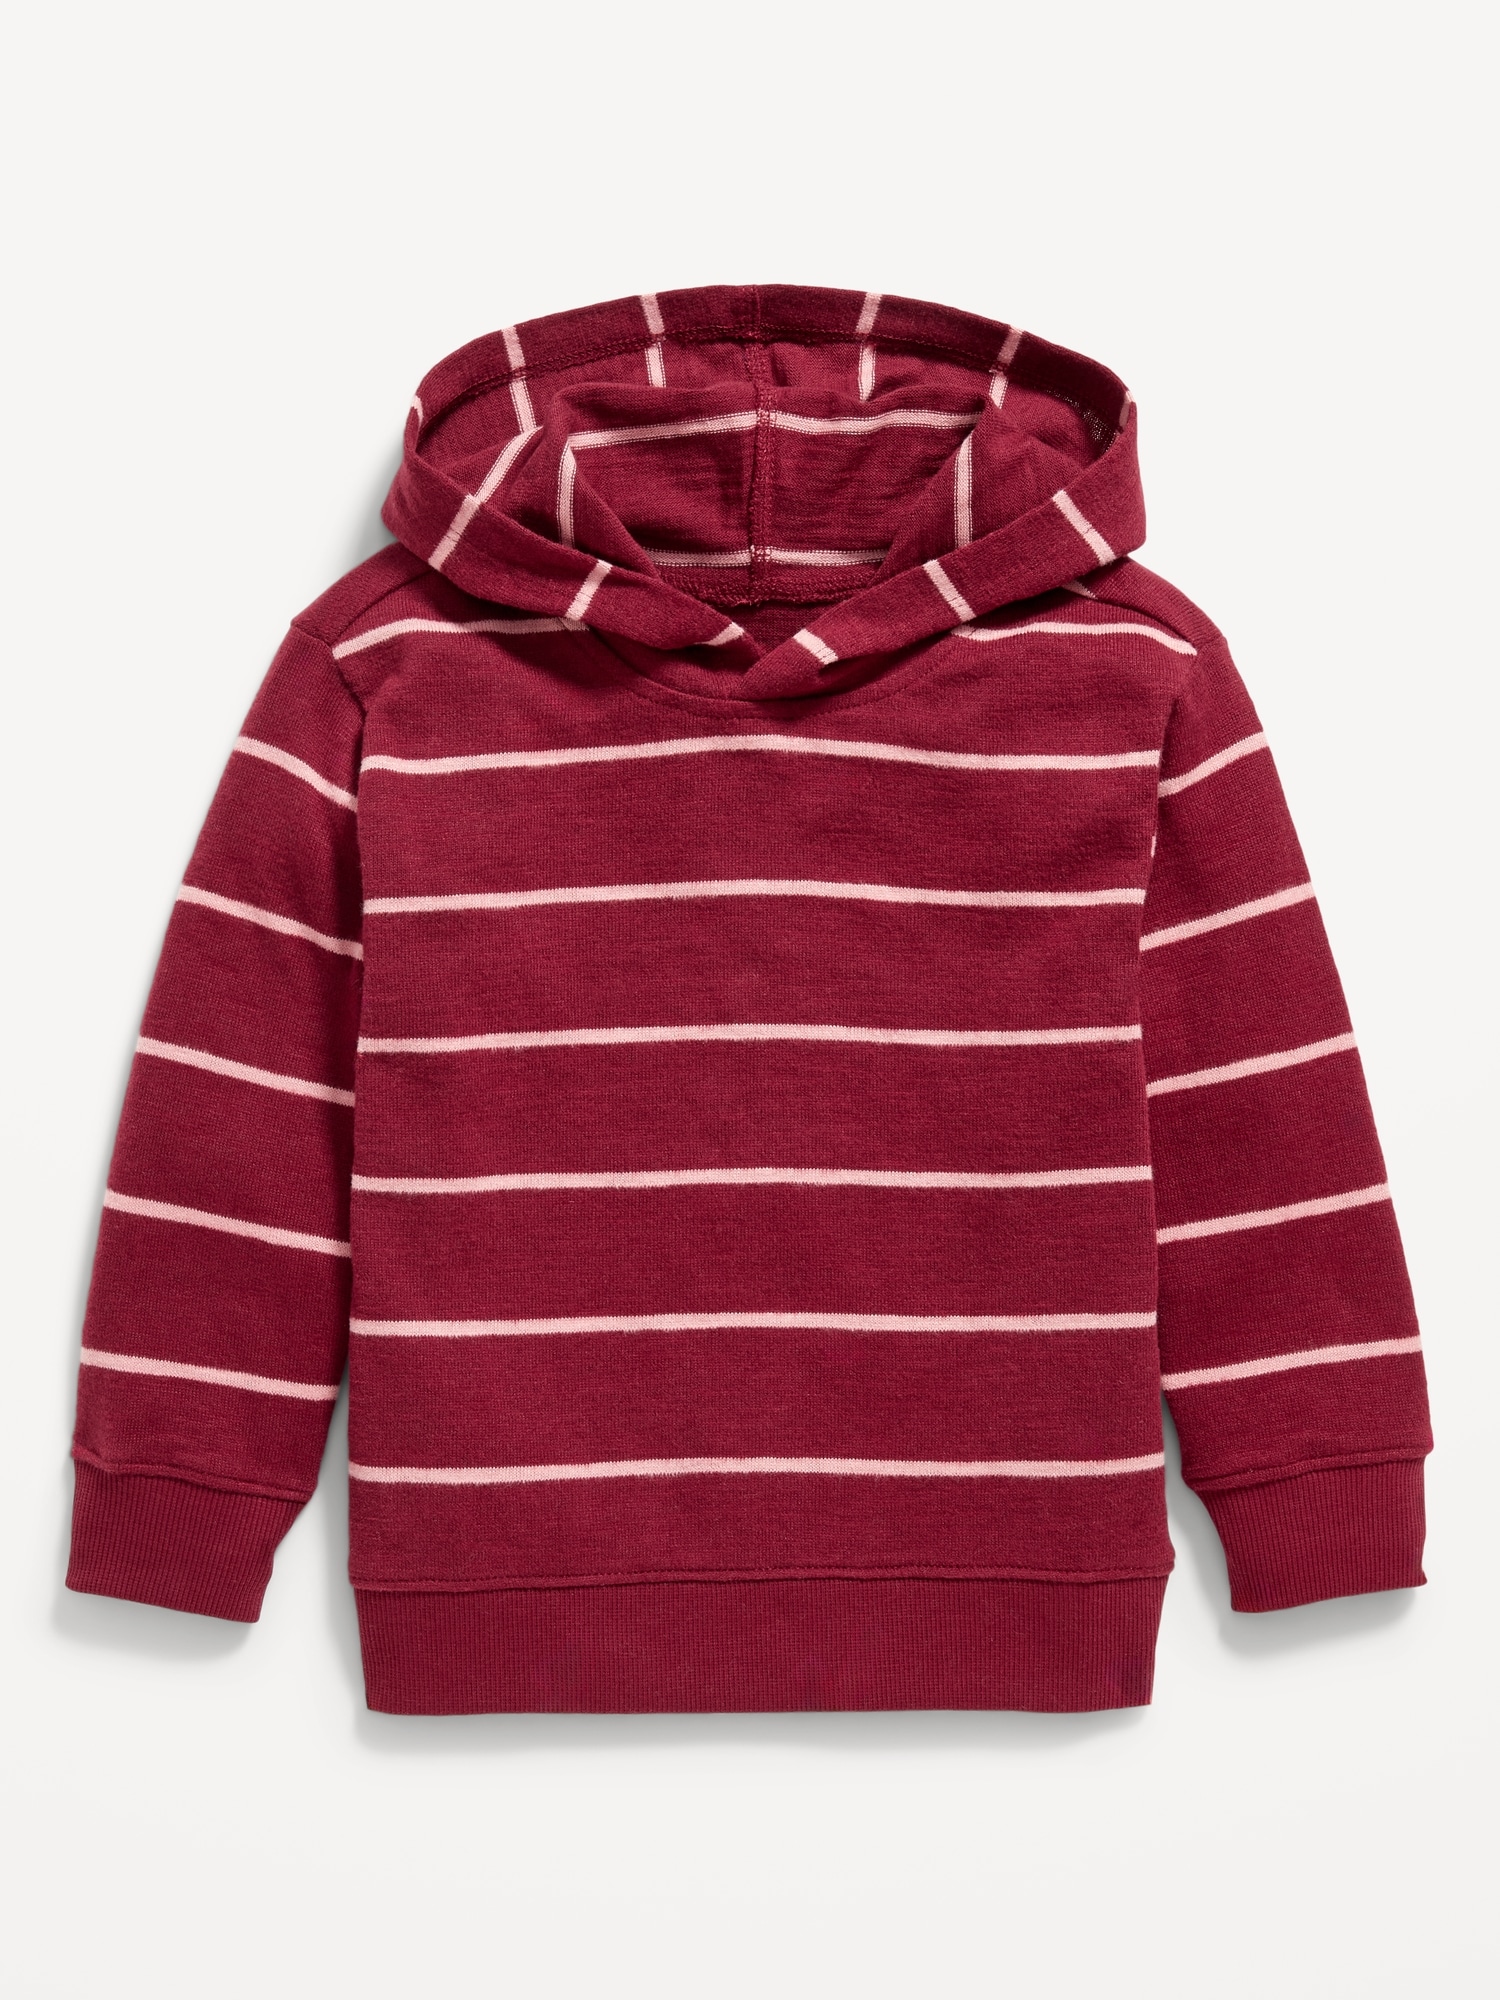 Striped Cozy-Knit Pullover Hoodie for Toddler Boys | Old Navy | Strickpullover